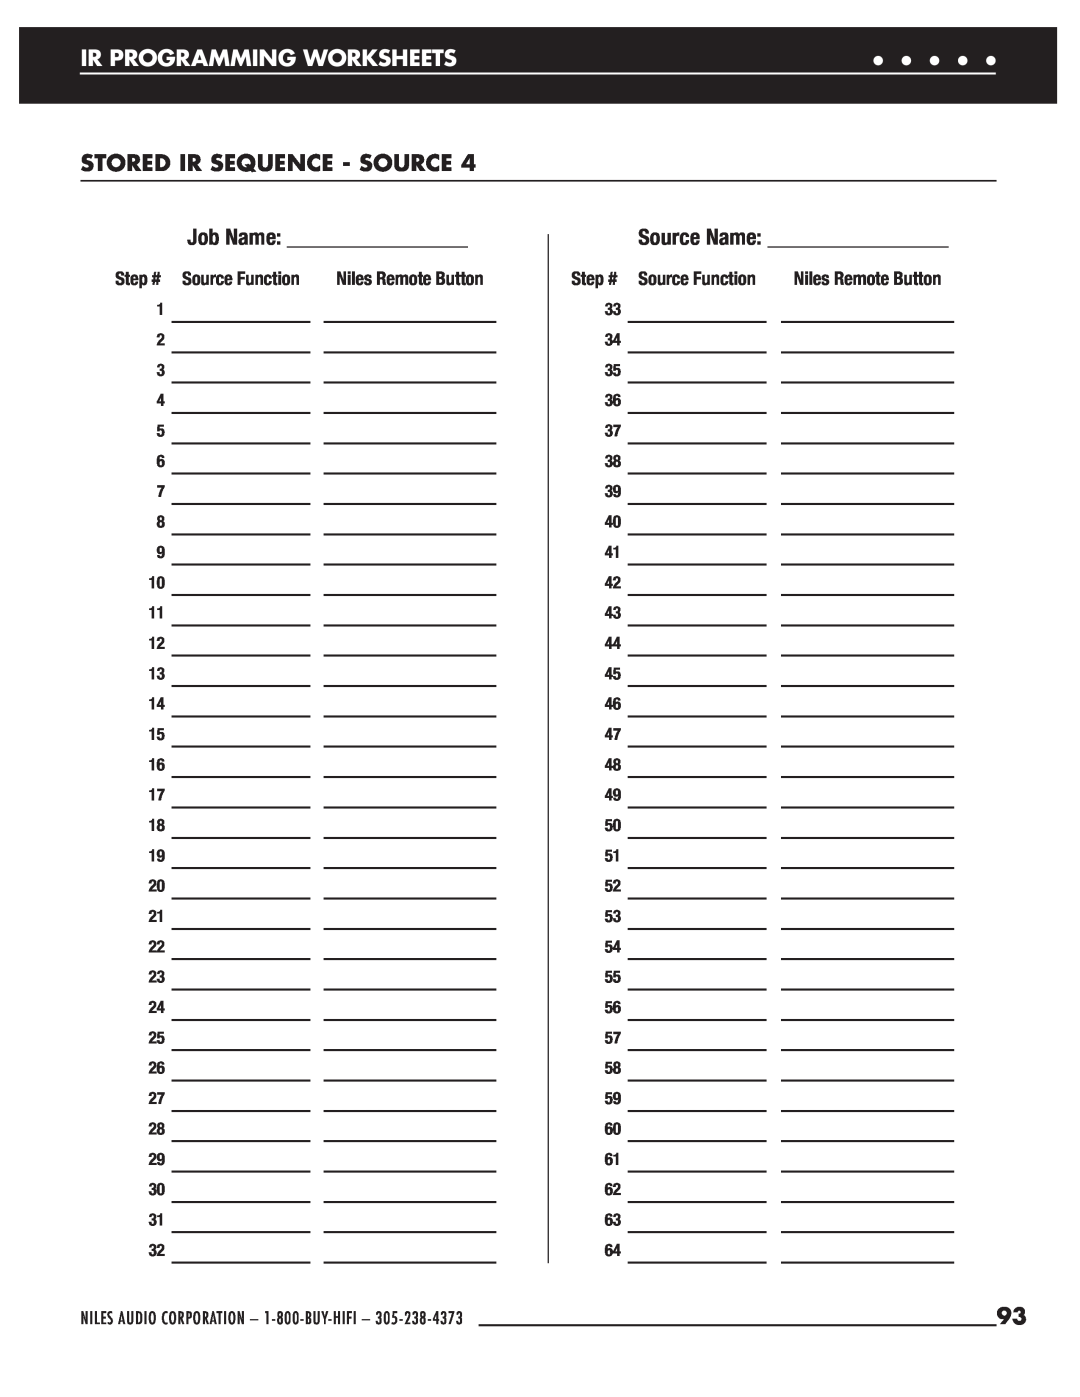 Niles Audio ZR-6 Ir Programming Worksheets, Stored Ir Sequence - Source, Job Name: _______________, Step # Source Function 